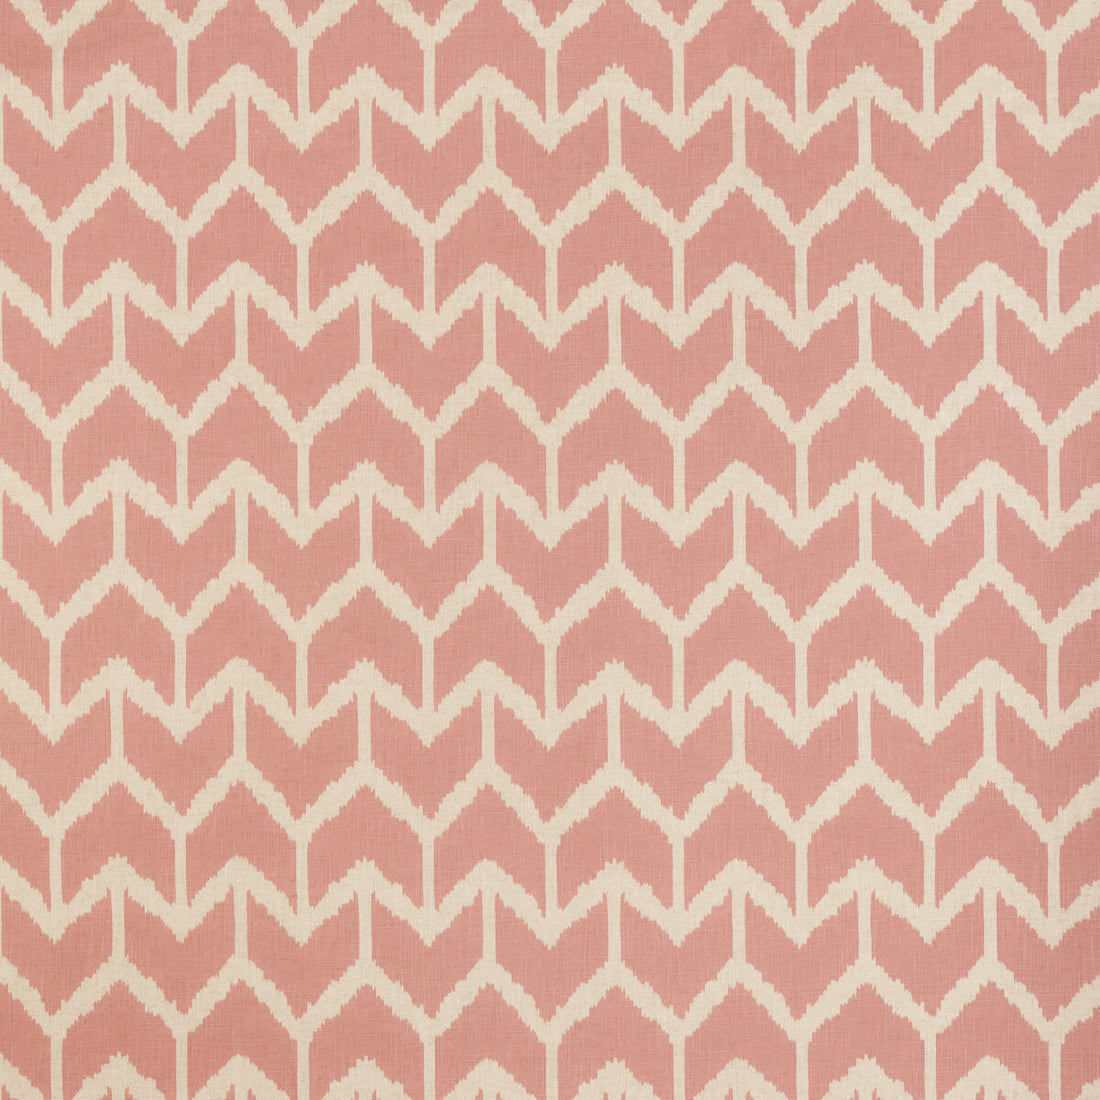 Togo fabric in pink color - pattern AM100312.17.0 - by Kravet Couture in the Andrew Martin Gobi collection